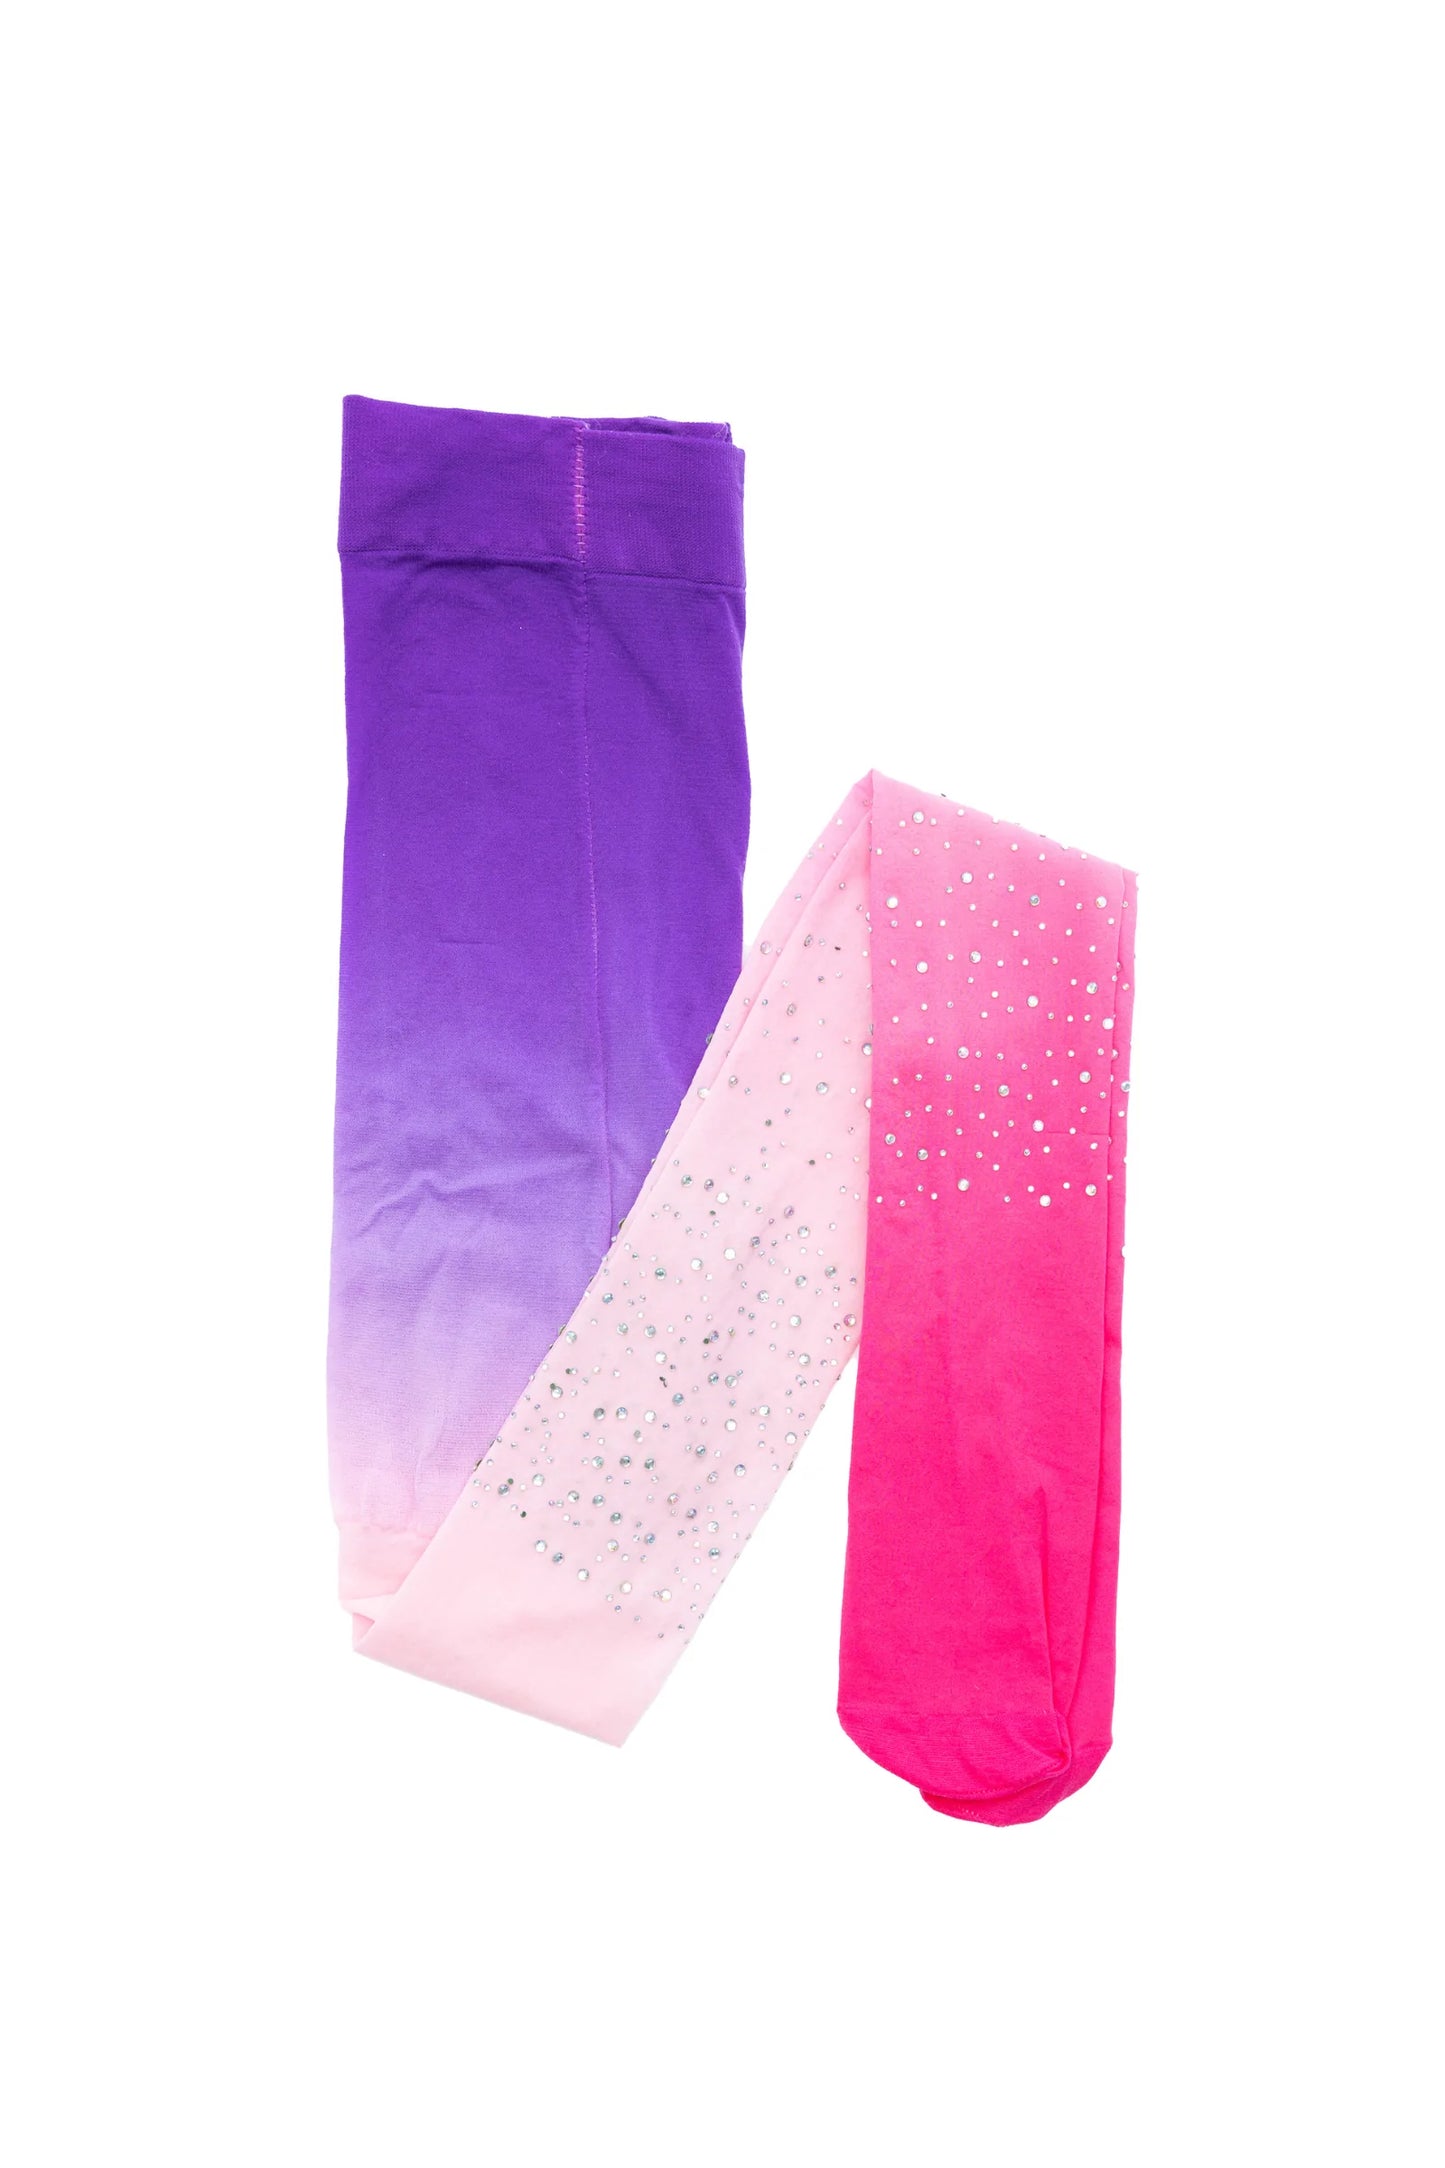 Dress Up - Rhinestone Tights (Ombre: Hot Pink, Purple, & Pink)